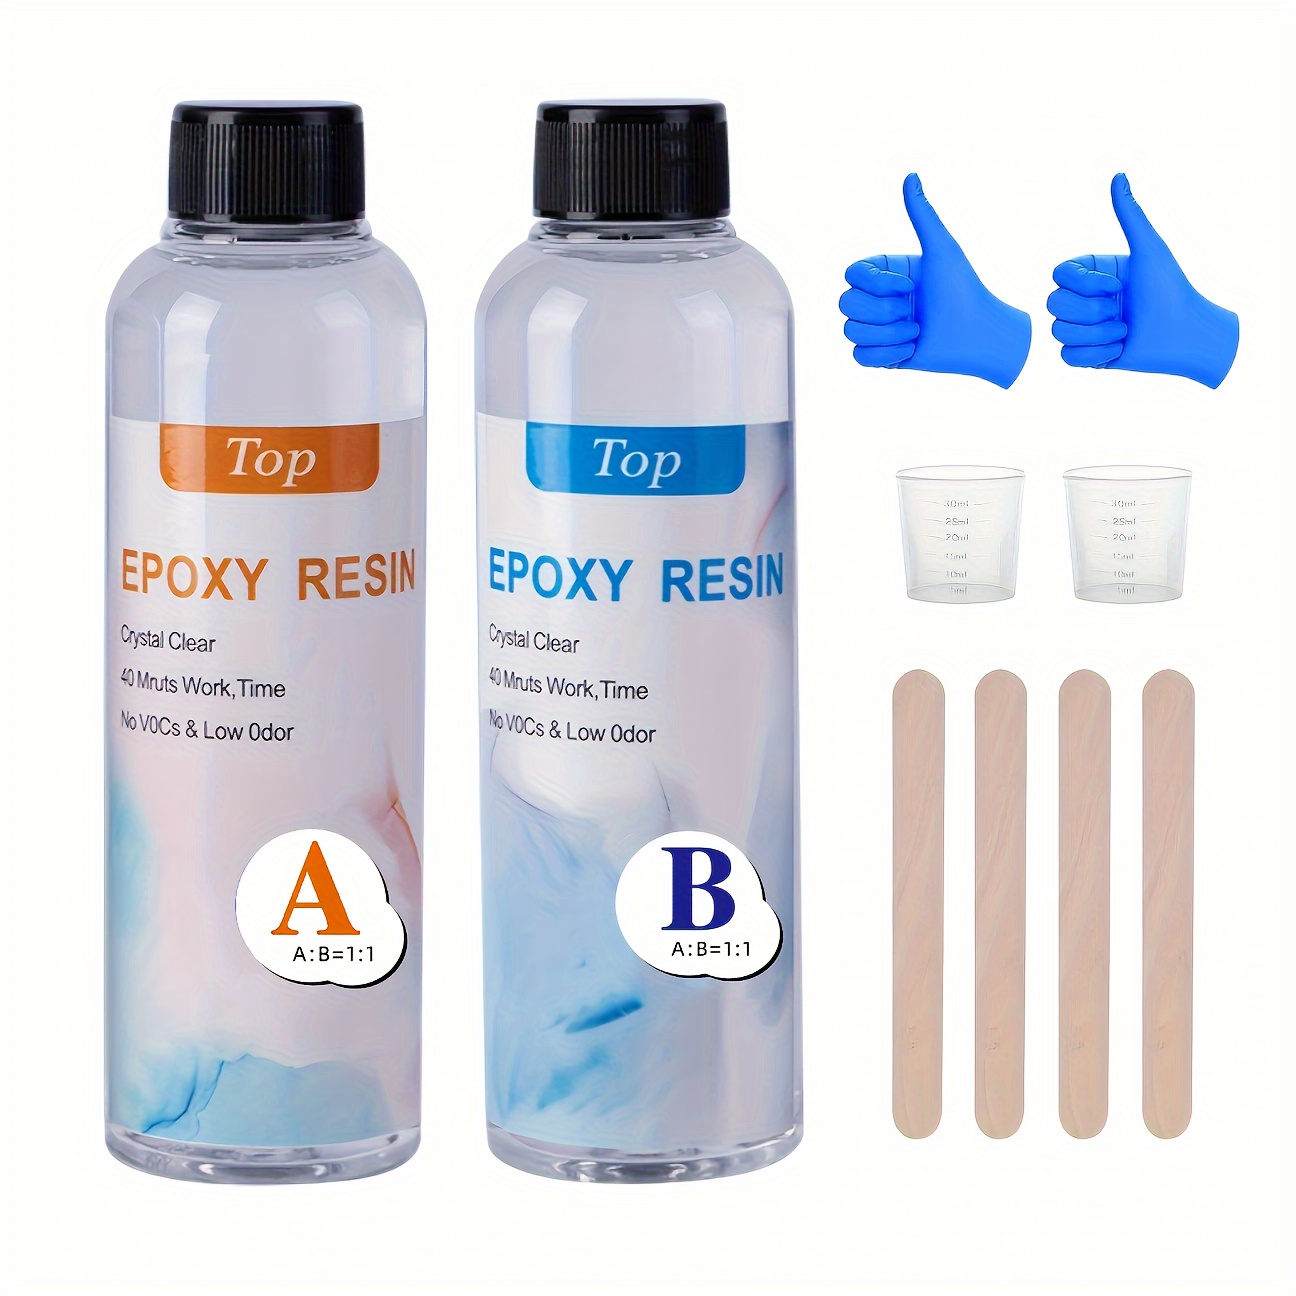 

Transparent Epoxy Resin Kit, 200ml/6.8oz, Suitable For River Table Casting And Coating, Art Casting Resin, Jewelry Making, Art Painting, Easy Mixing In 1:1 Ratio